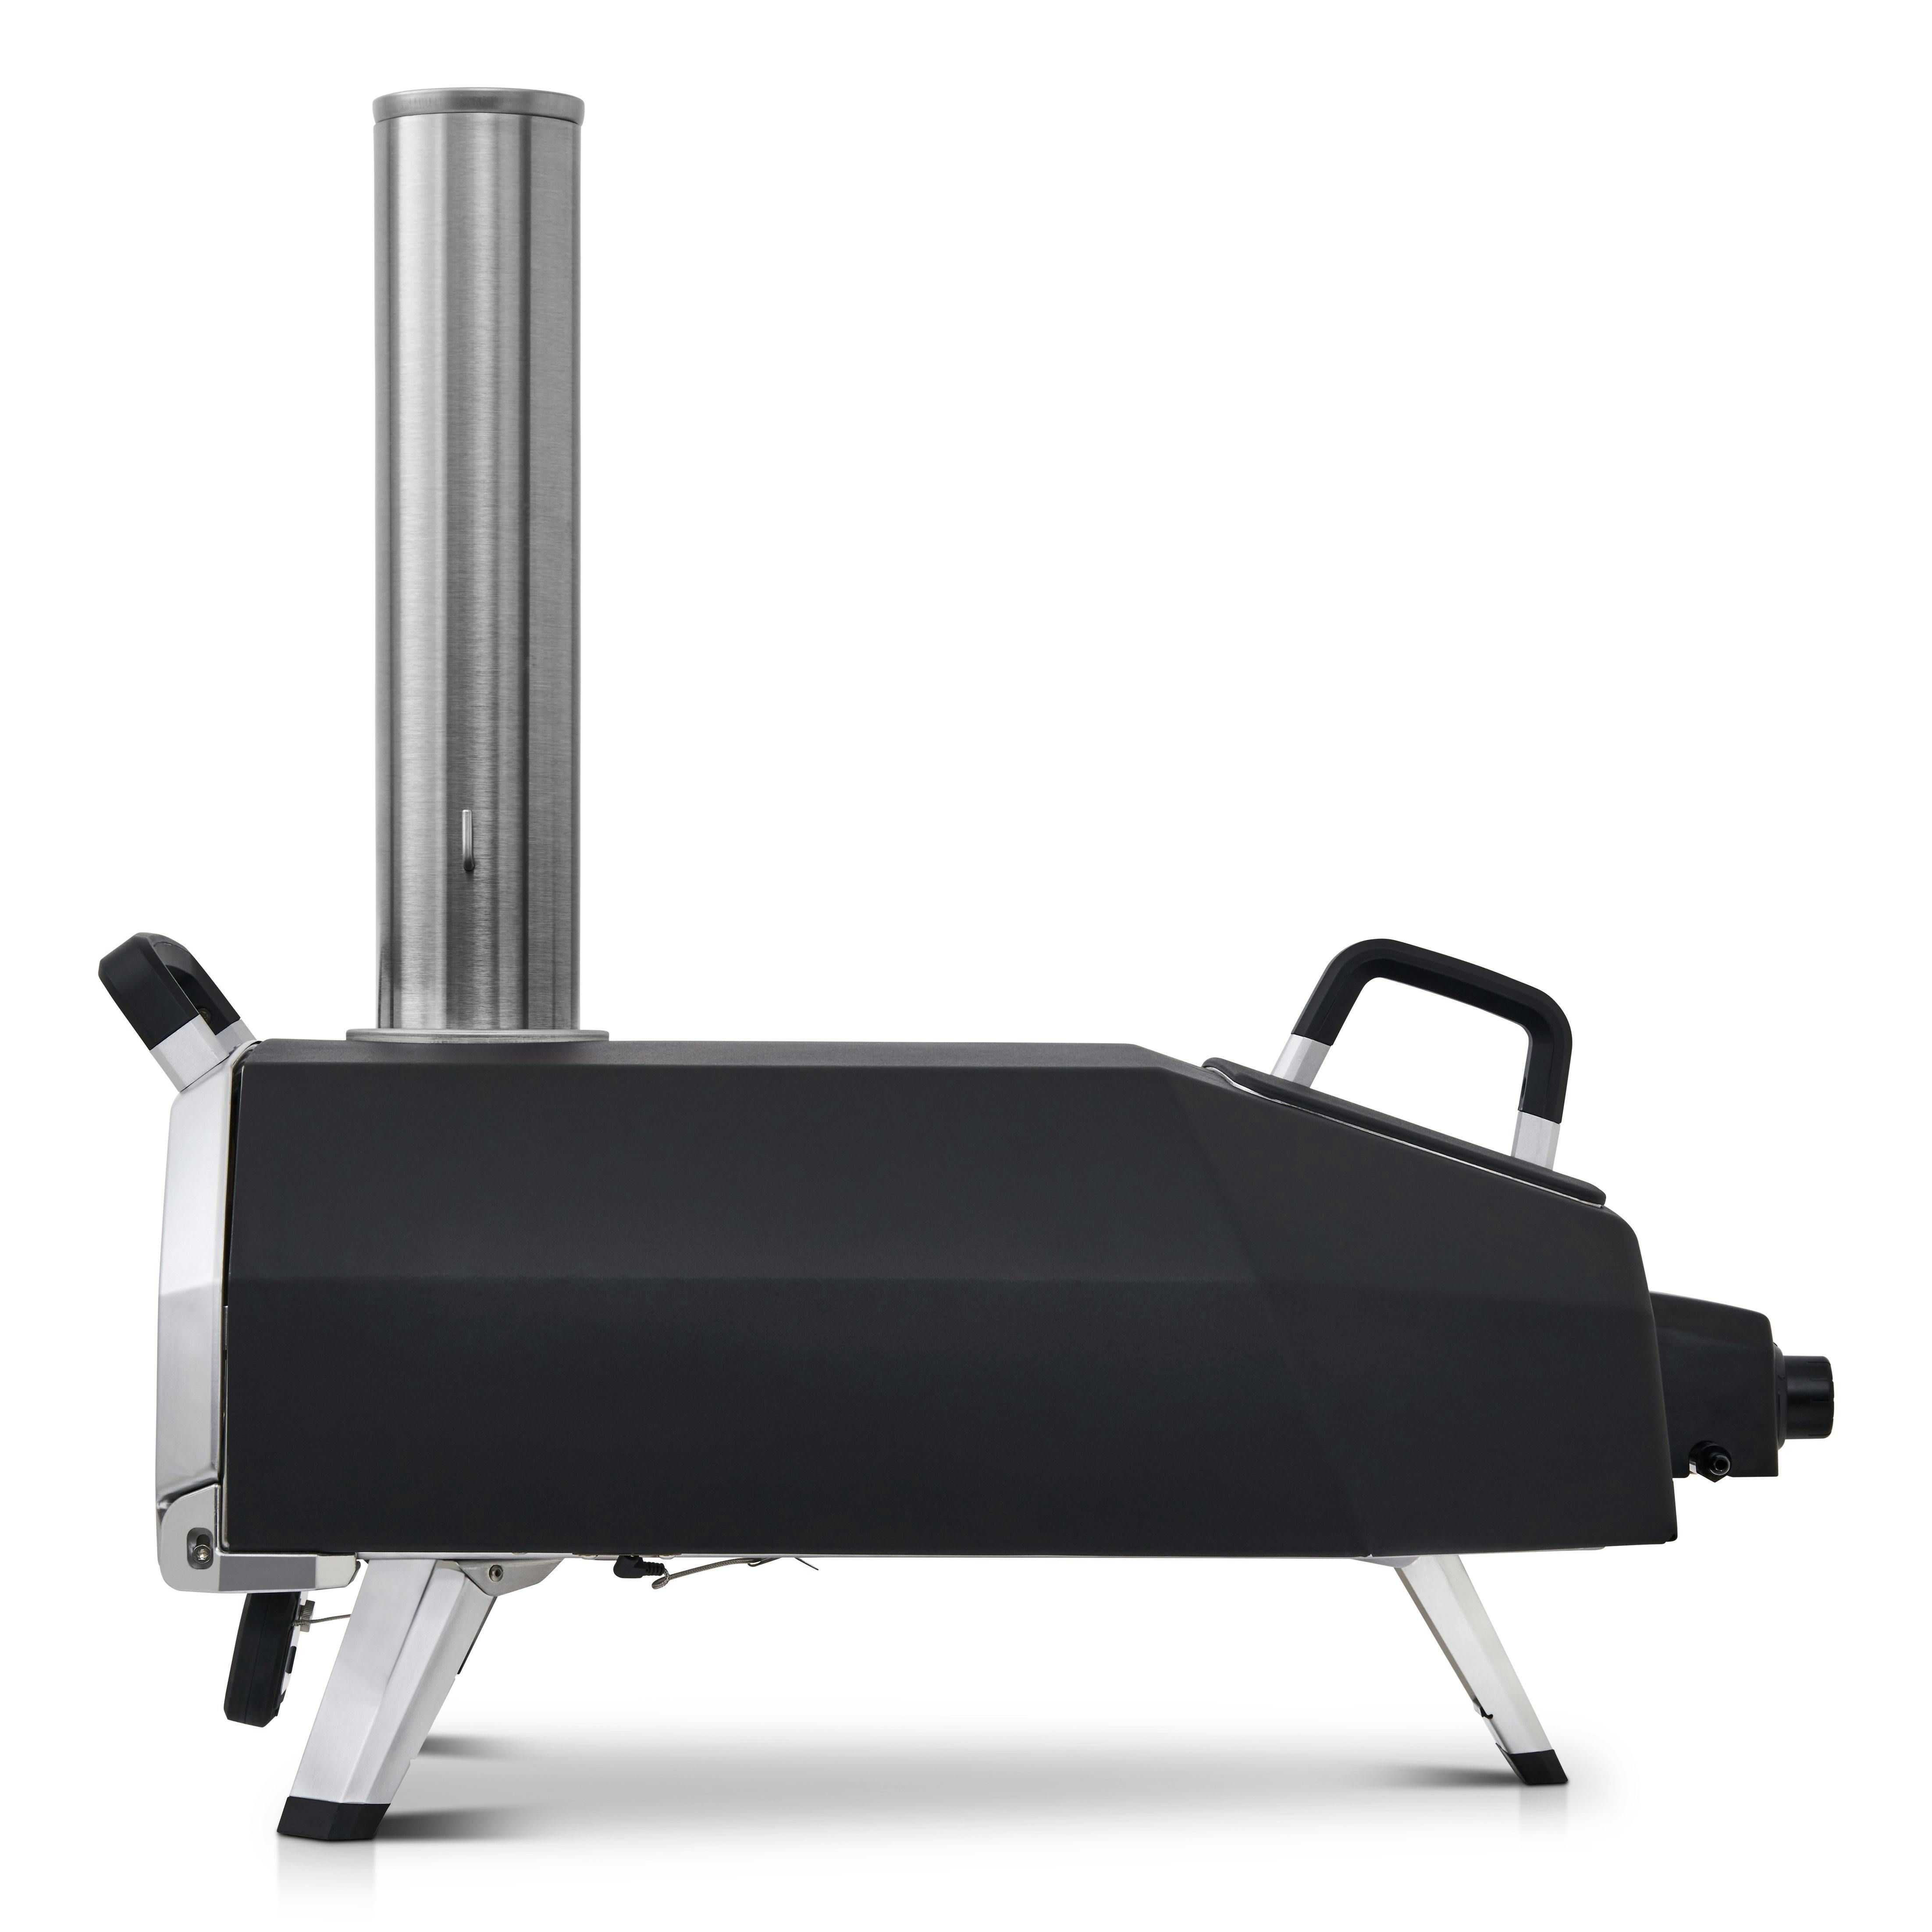 Ooni Karu 16 Multi-Fuel Outdoor Pizza Oven - Wood Fired and Gas Fueled Oven - Outdoor Pizza Maker